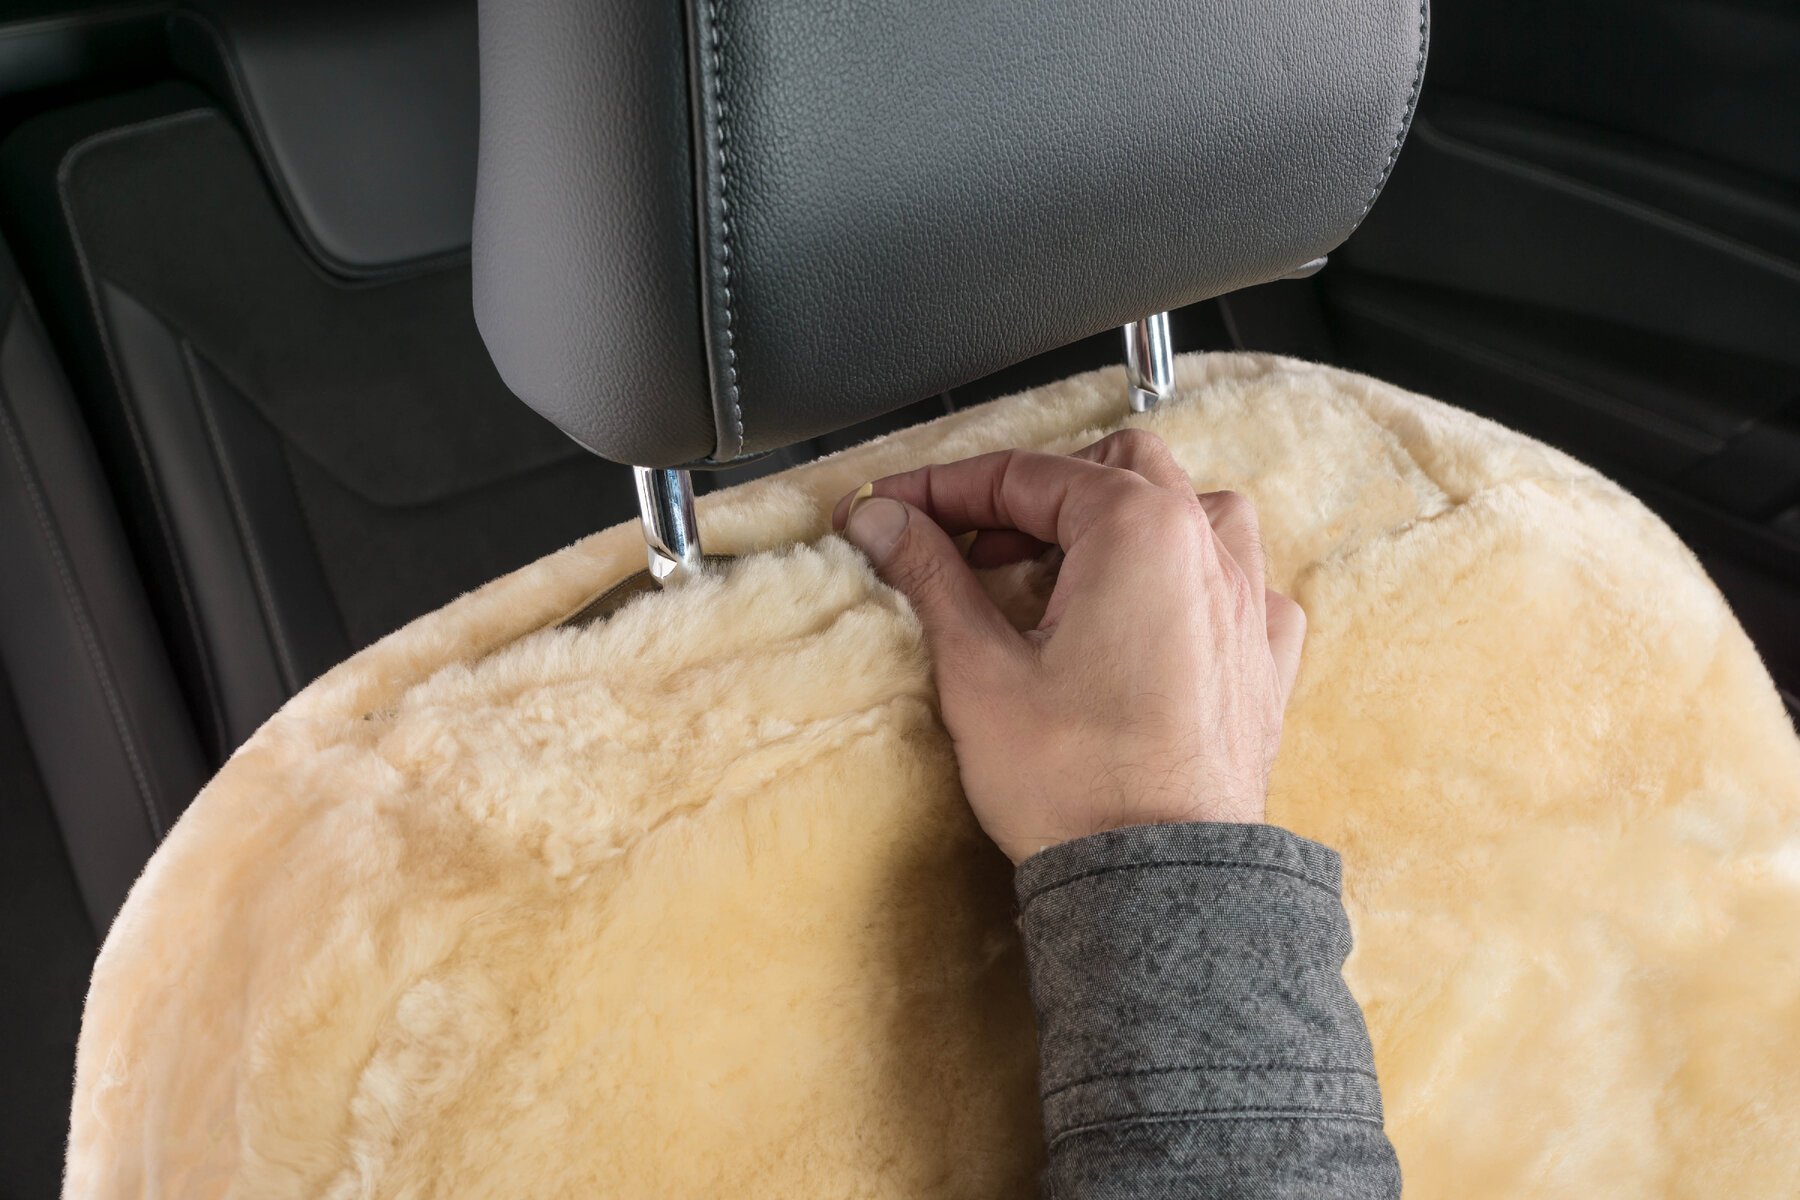 Shauna lambskin car seat cover, 20mm thick wool pile - 1 piece in beige with ZIPP system